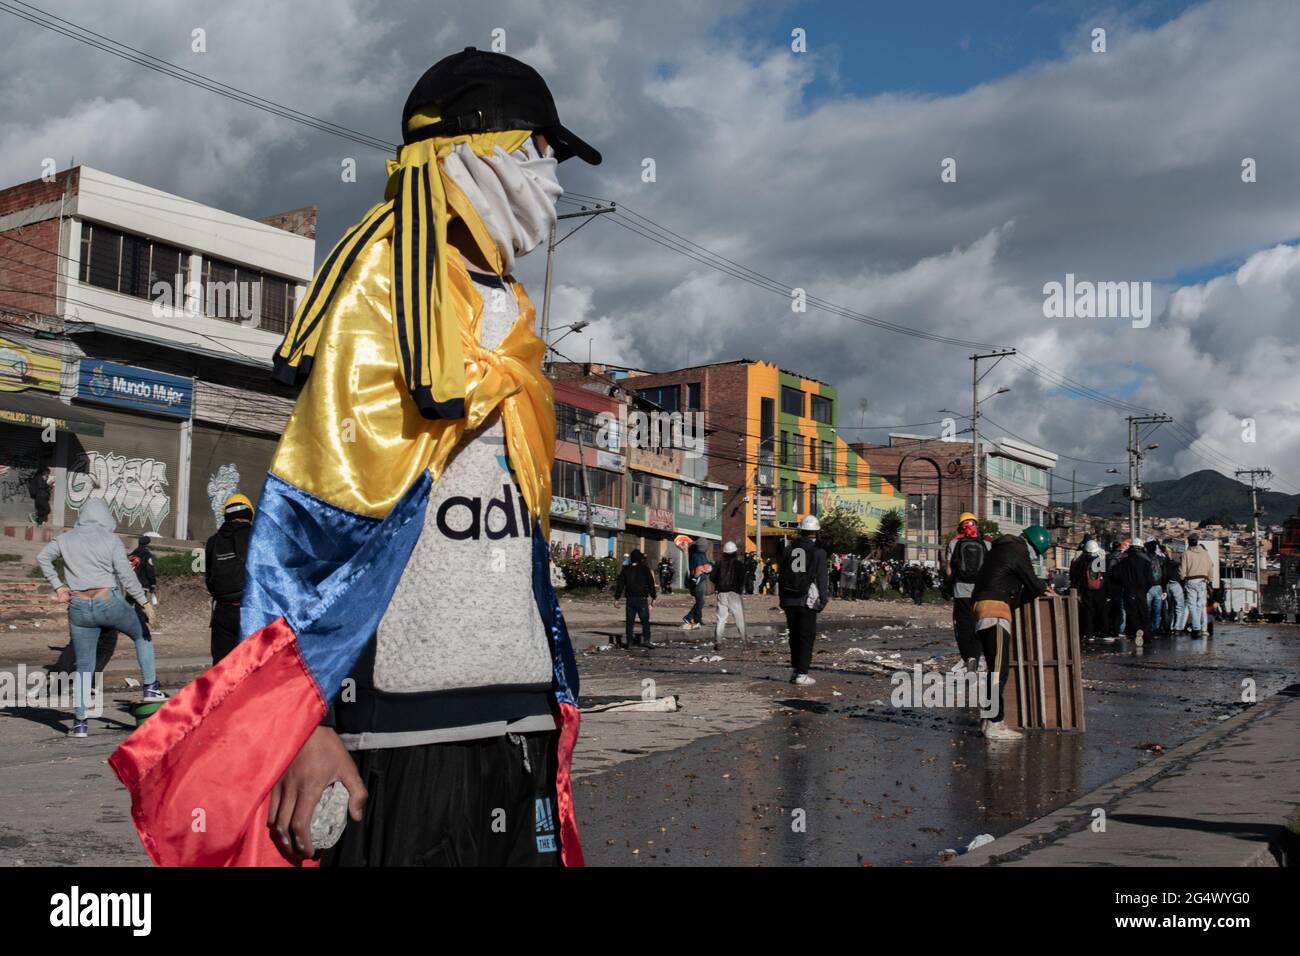 Bogota, Colombia. 21st June, 2021. A demonstrator uses a Colombian flag as a cape as clashes between demonstratros and Colombia's riot police erupt anti-government protest raise in Bogota Colombia against the government of president Ivan Duque, inequalities and abuse of authority by police. Credit: Long Visual Press/Alamy Live News Stock Photo